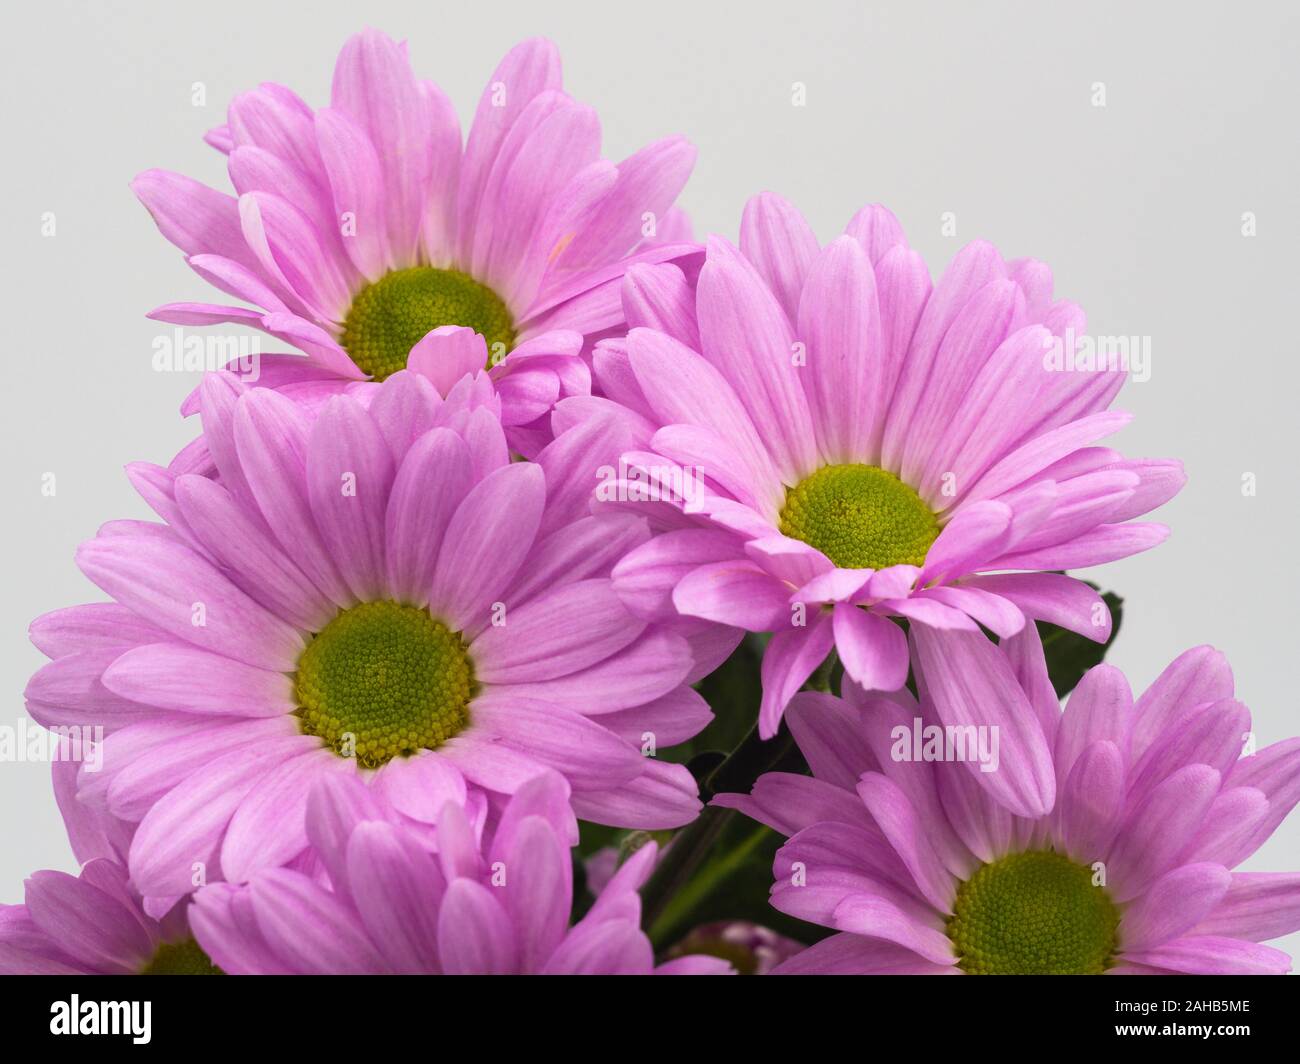 beautiful pink daisies flowers isolated on white background Stock Photo